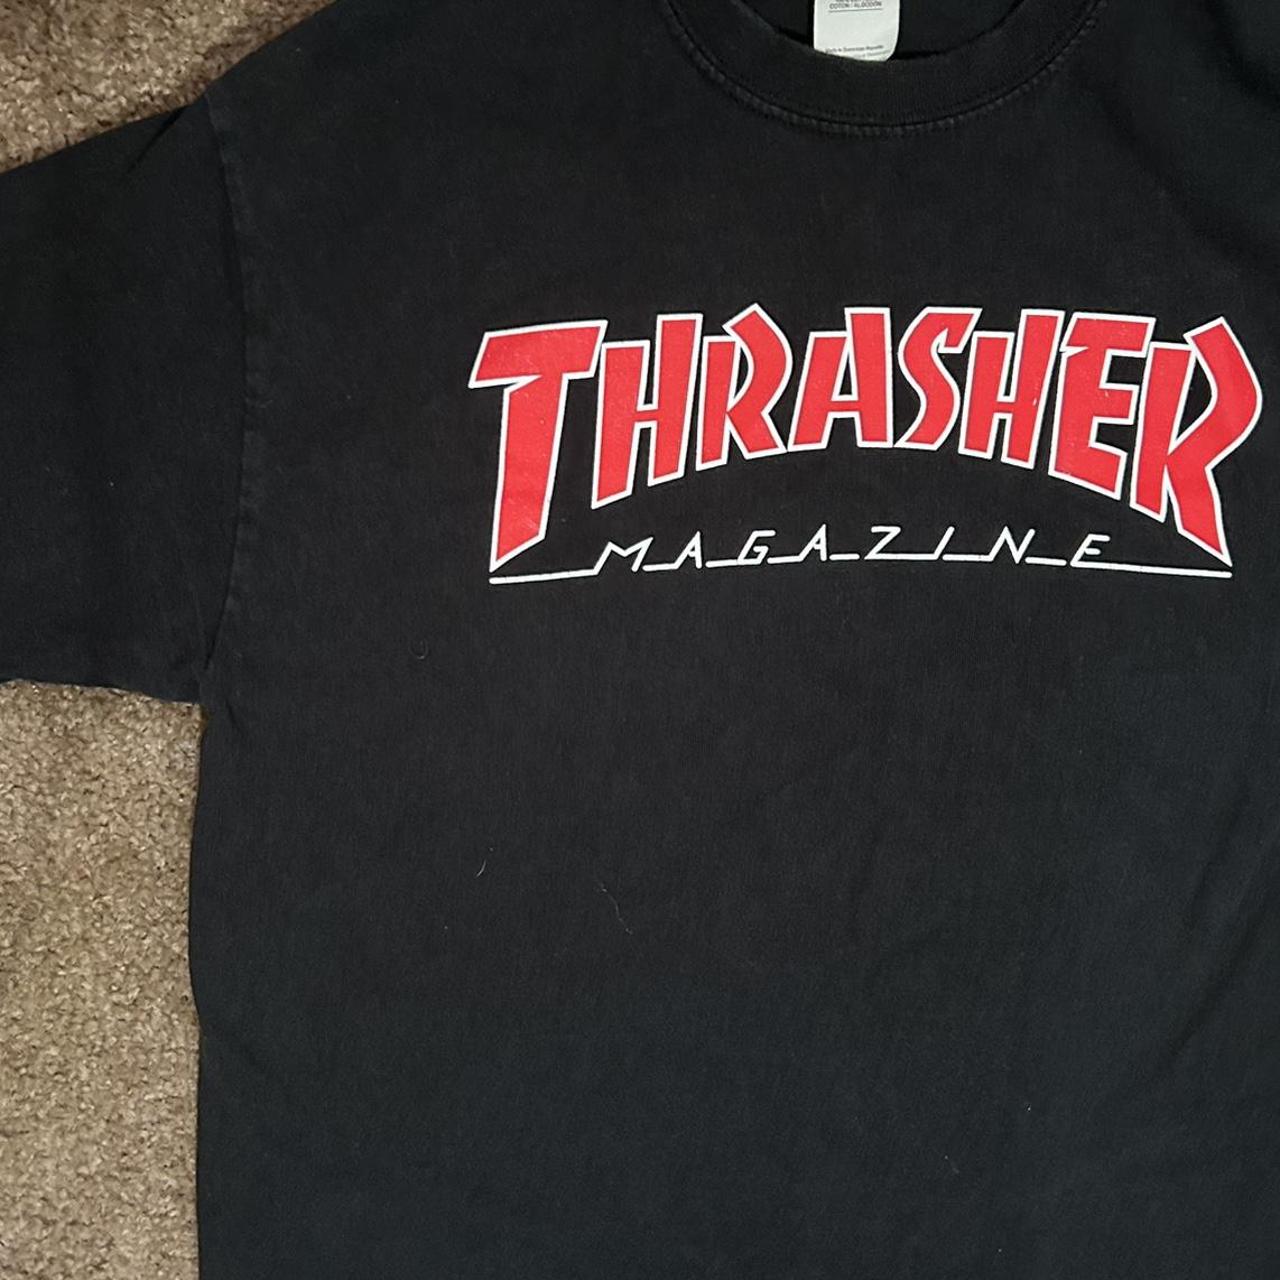 Thrasher Men's Black and Red T-shirt